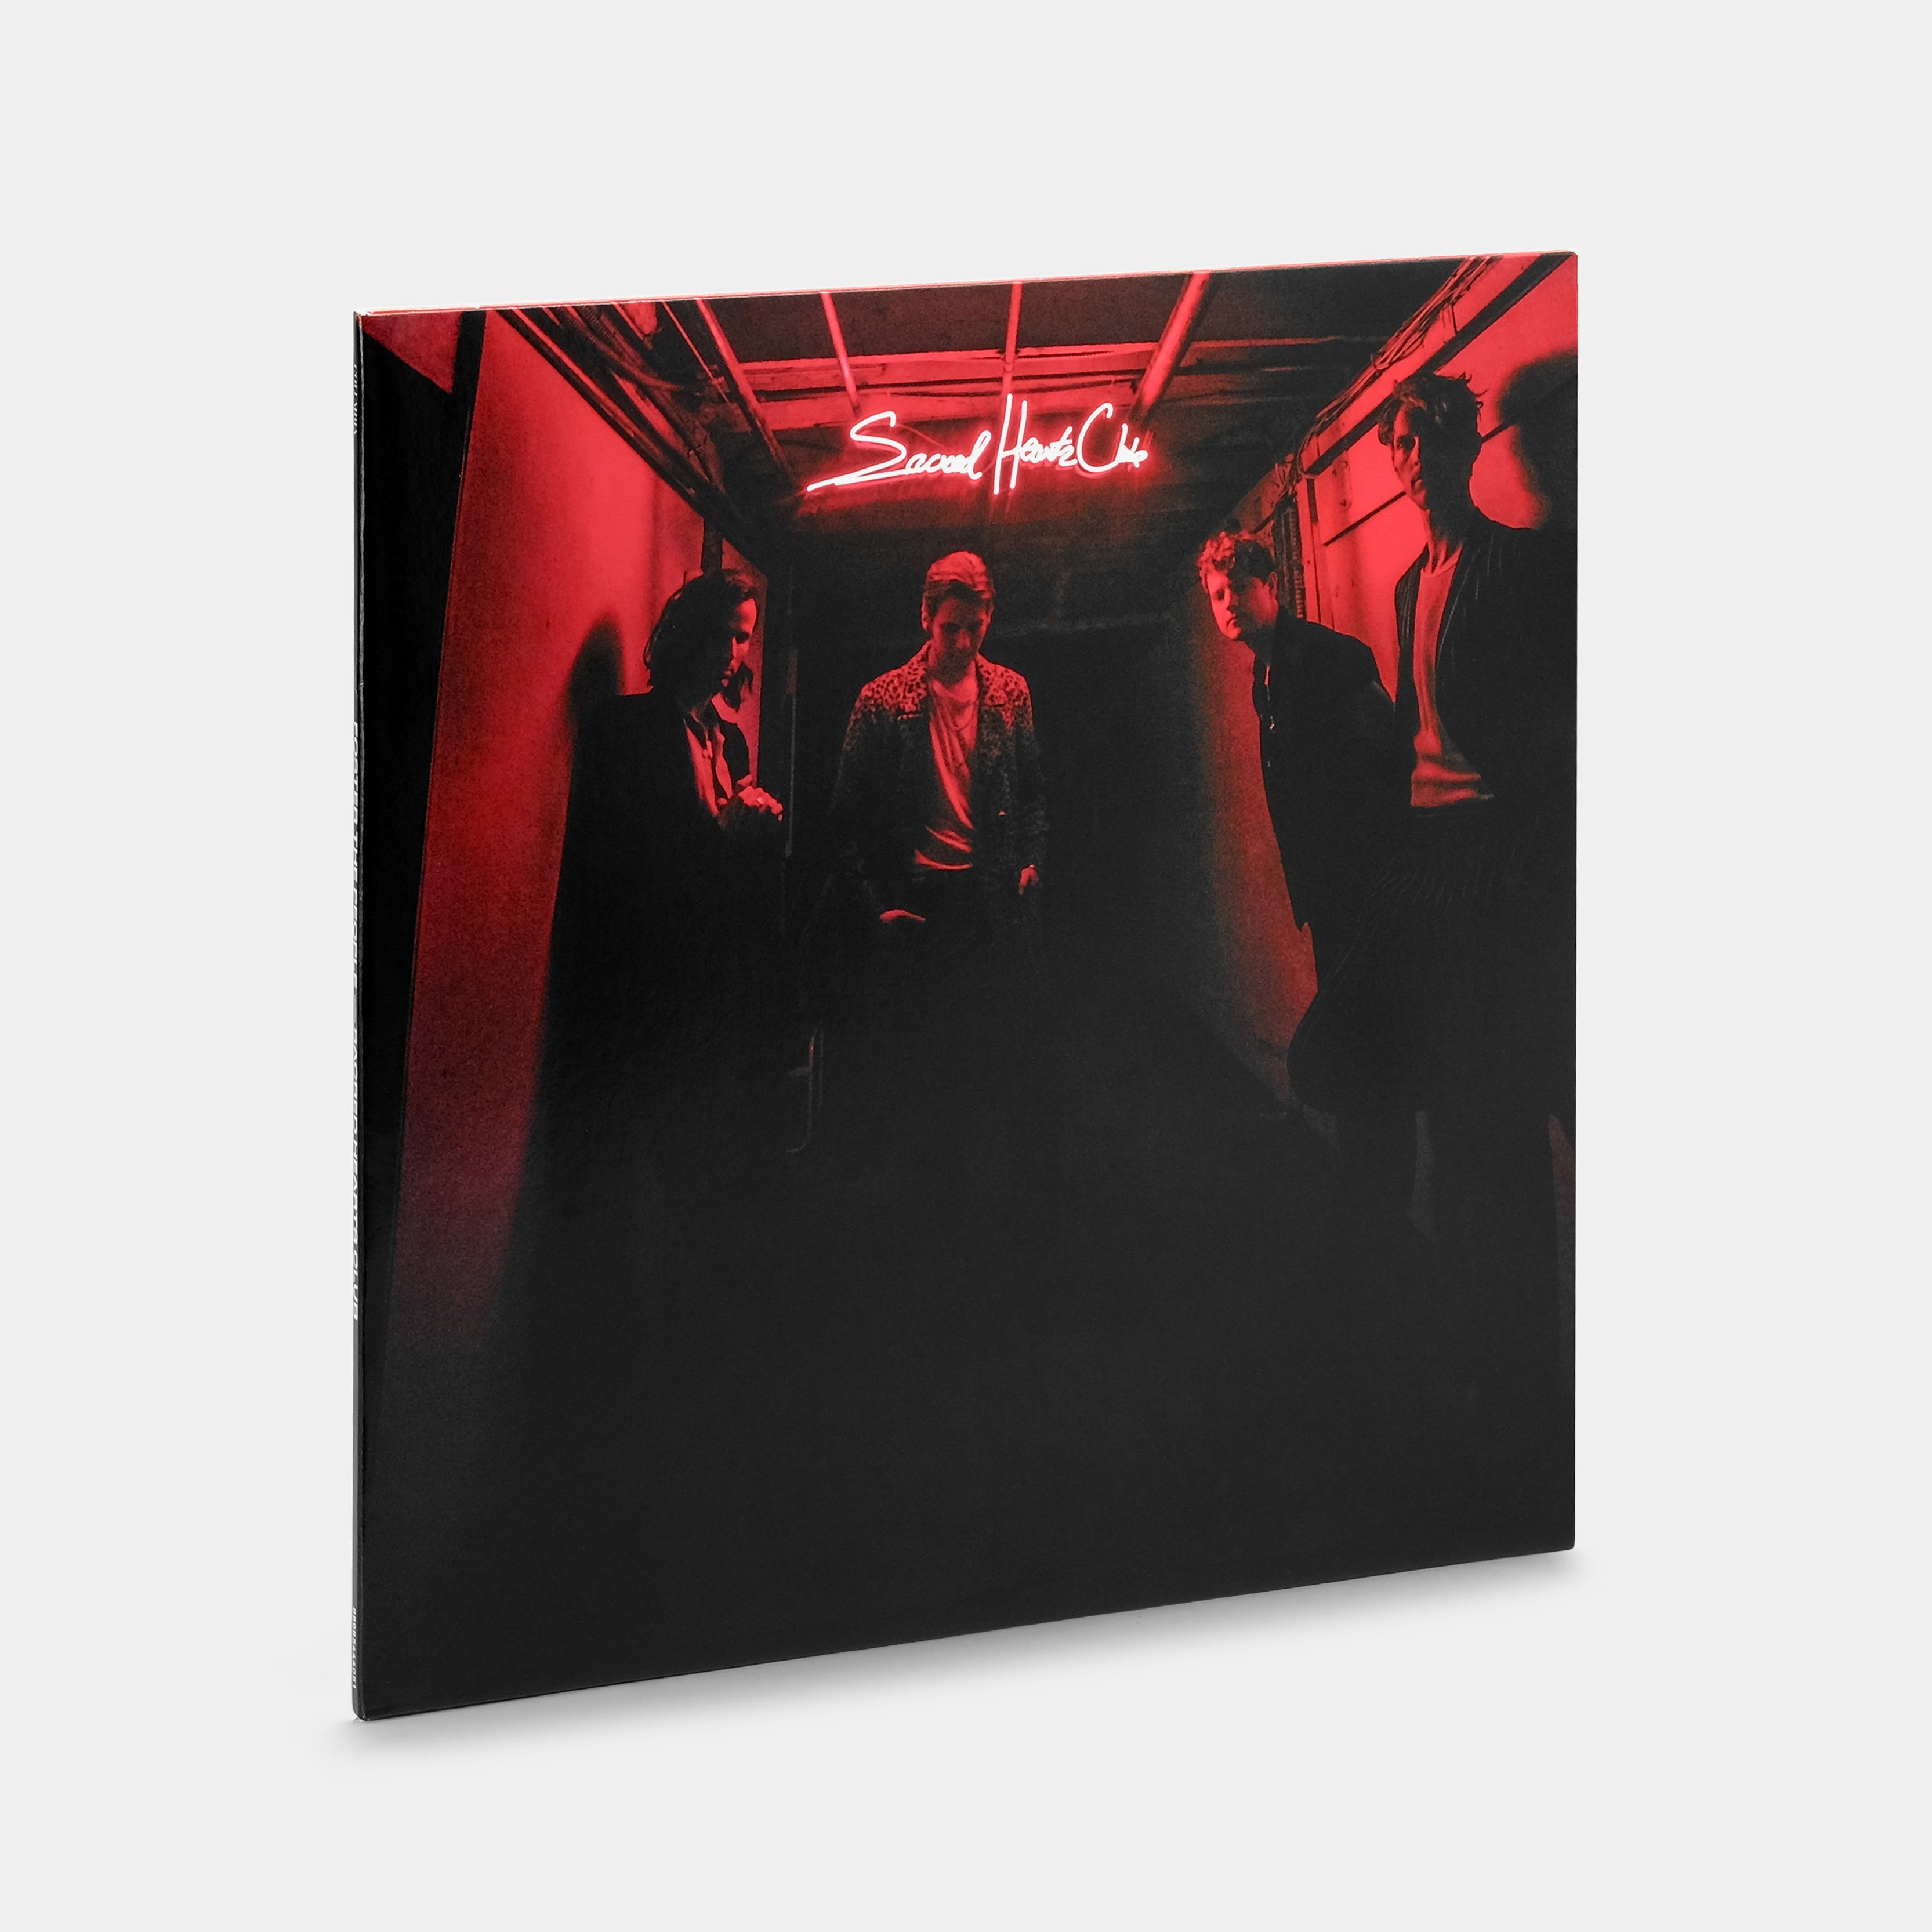 Foster The People - Sacred Hearts Club LP Vinyl Record